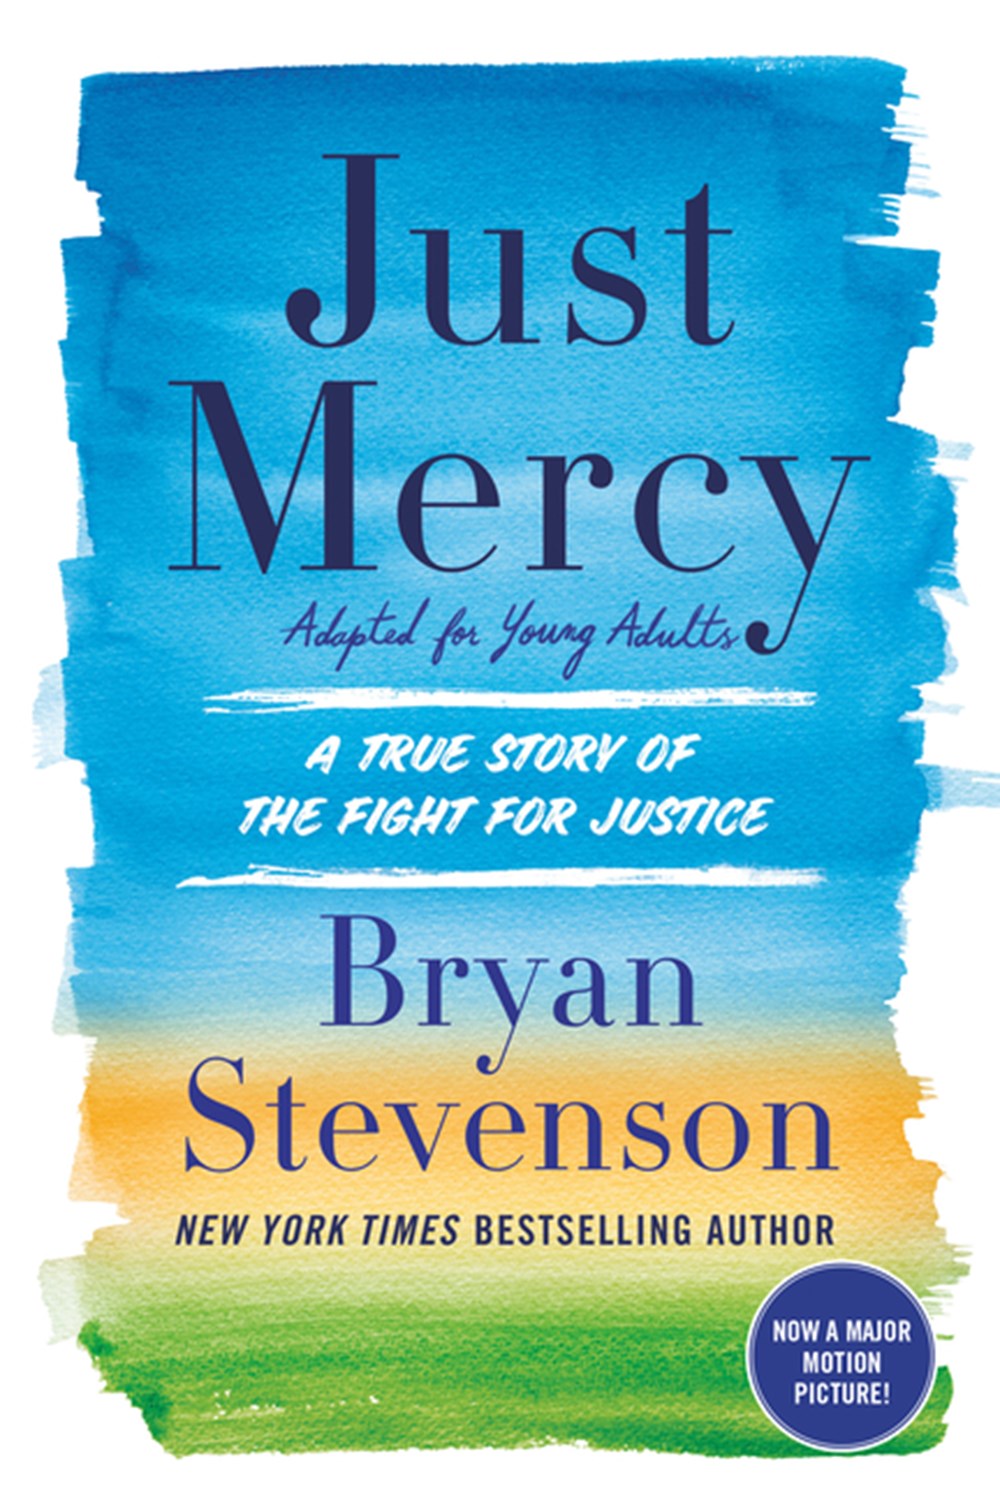 Just Mercy (Adapted for Young Adults) A True Story of the Fight for Justice